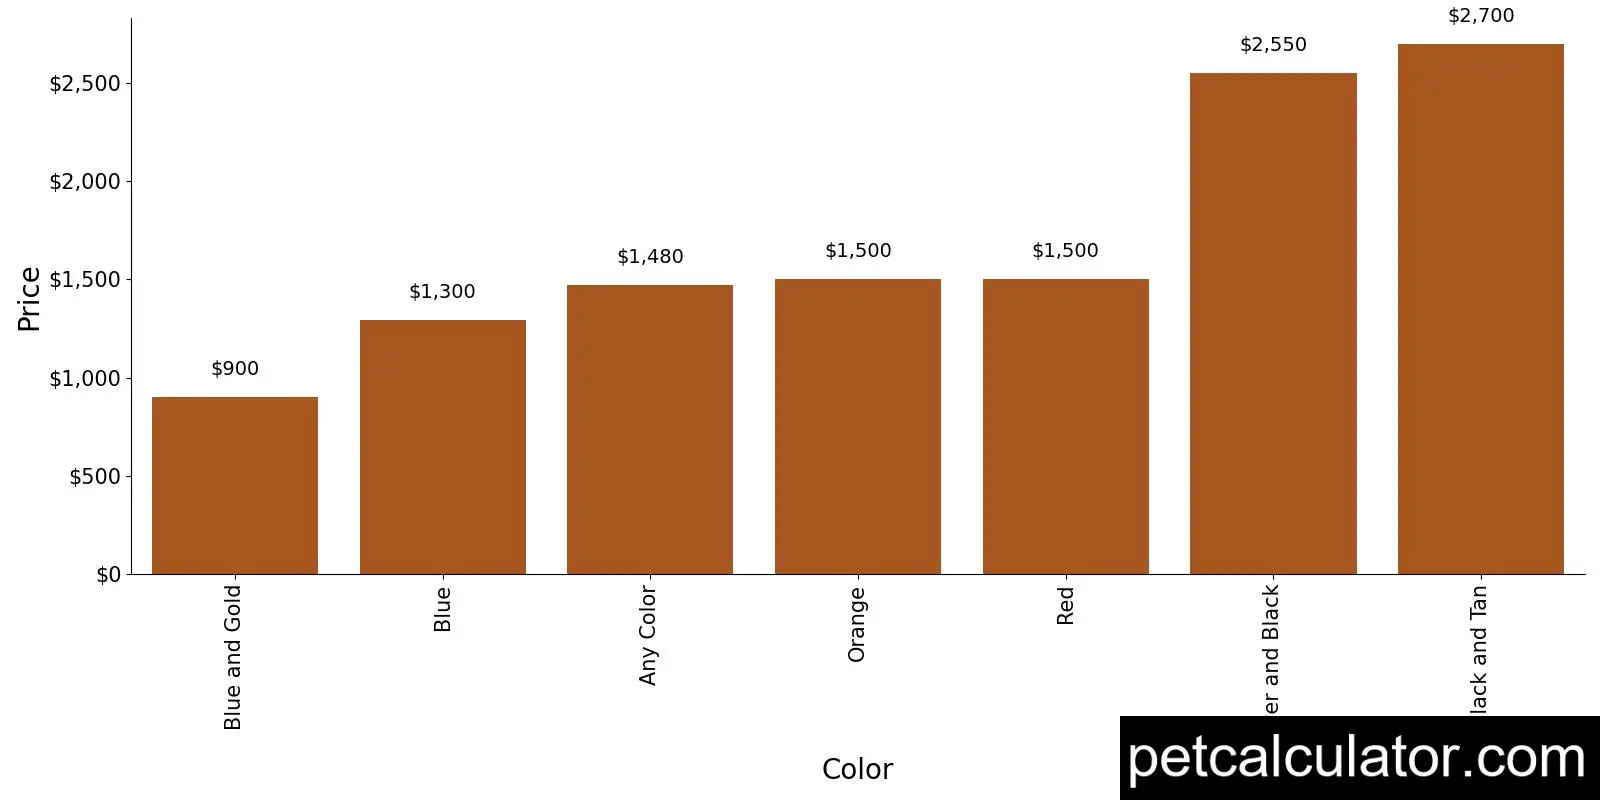 Price of Silky Terrier by Color 